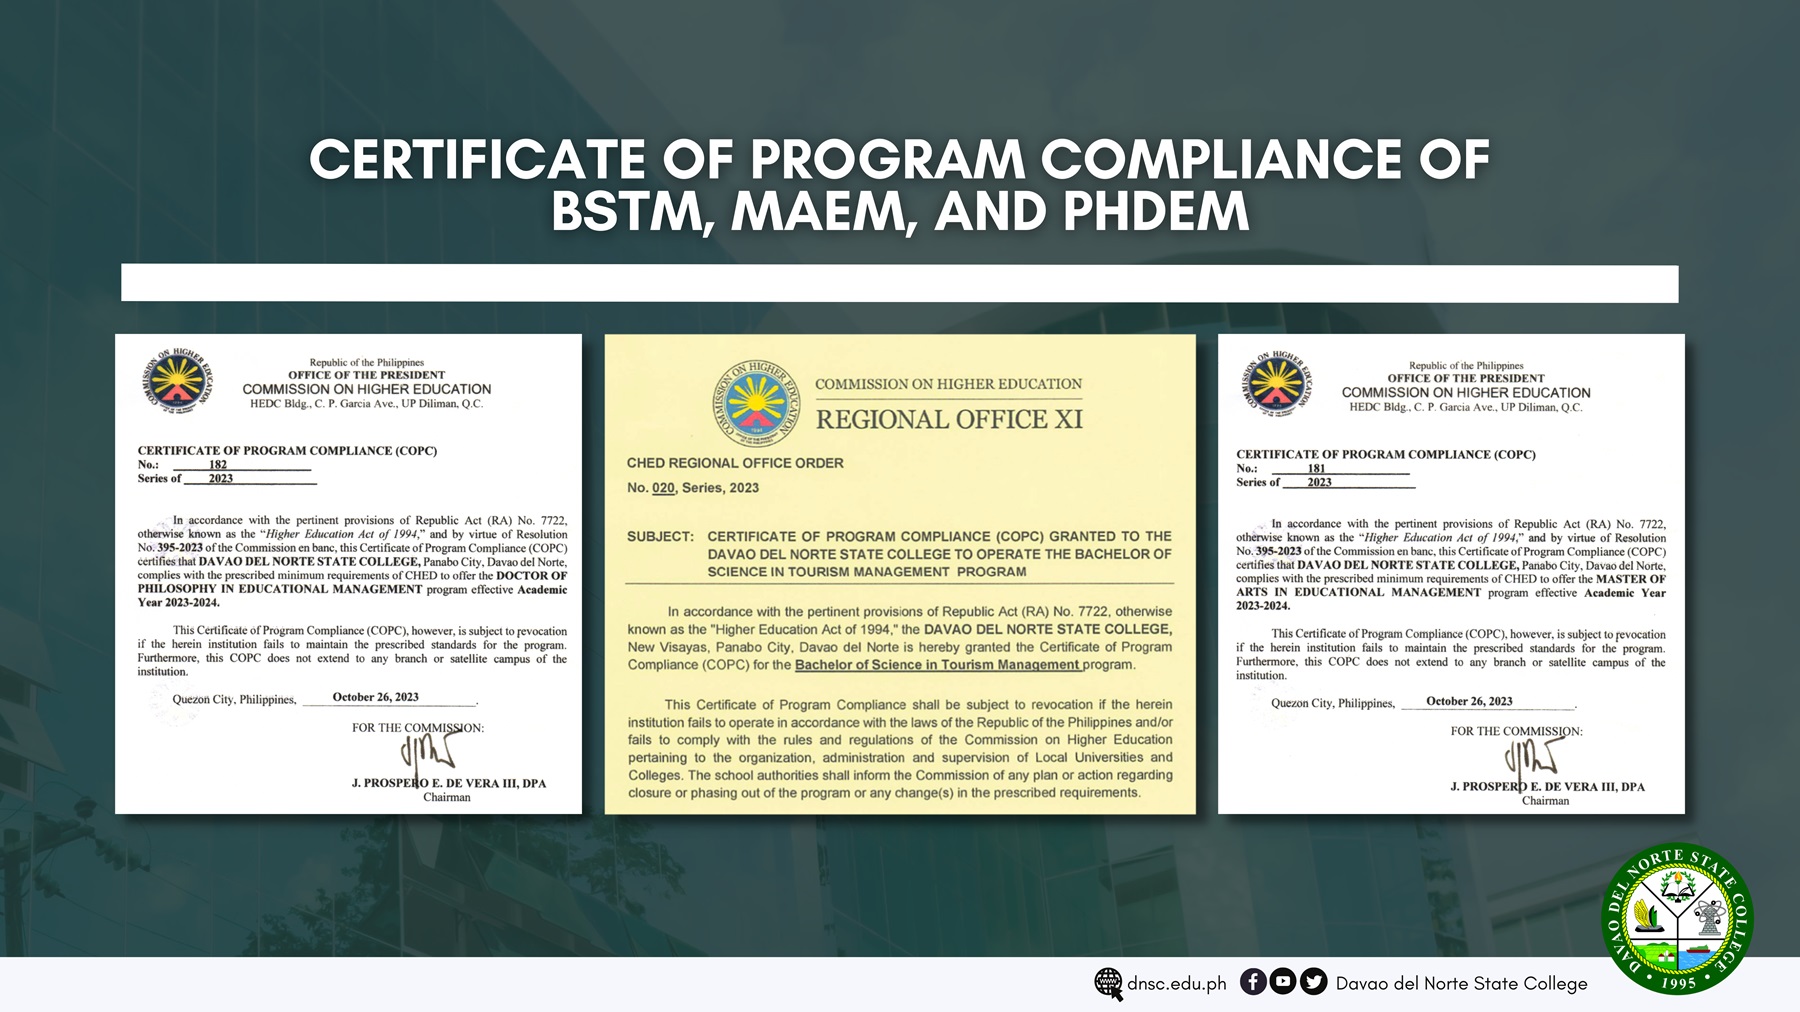 Three DNSC programs receive Certificate of Program Compliance from CHED in Q4 2023